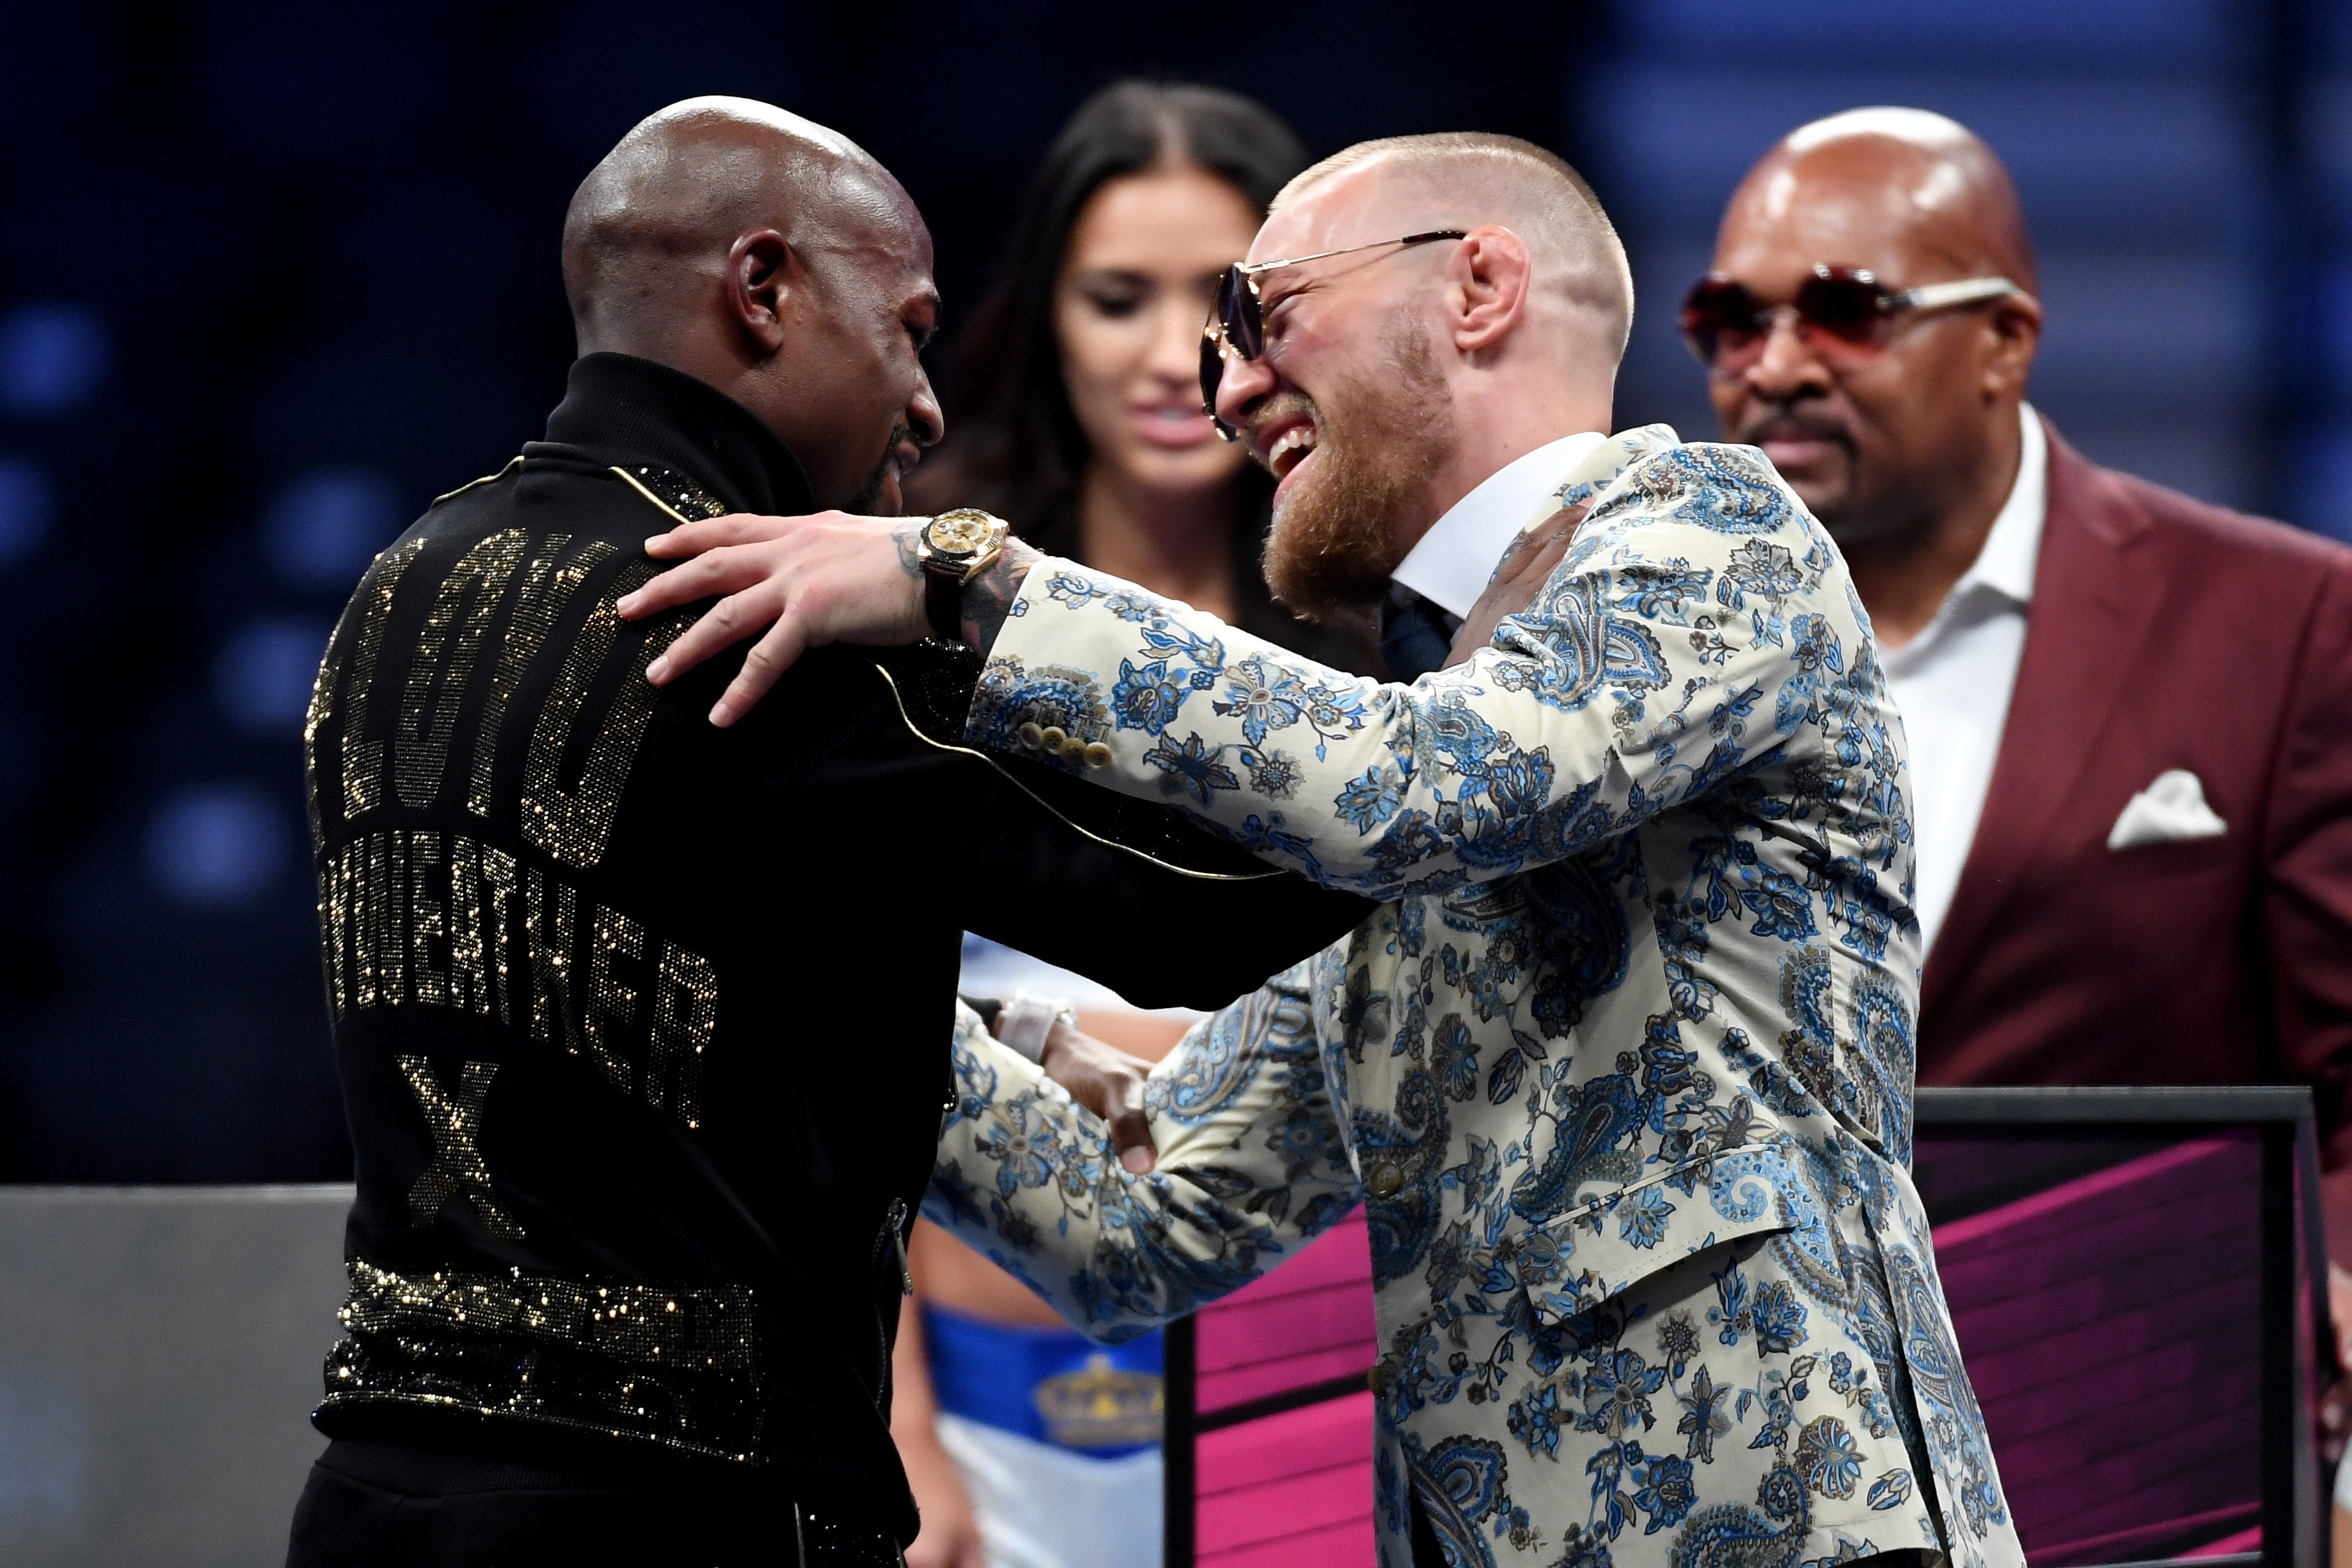 (L-R) Floyd Mayweather Jr. and Conor McGregor shake hands after Mayweather